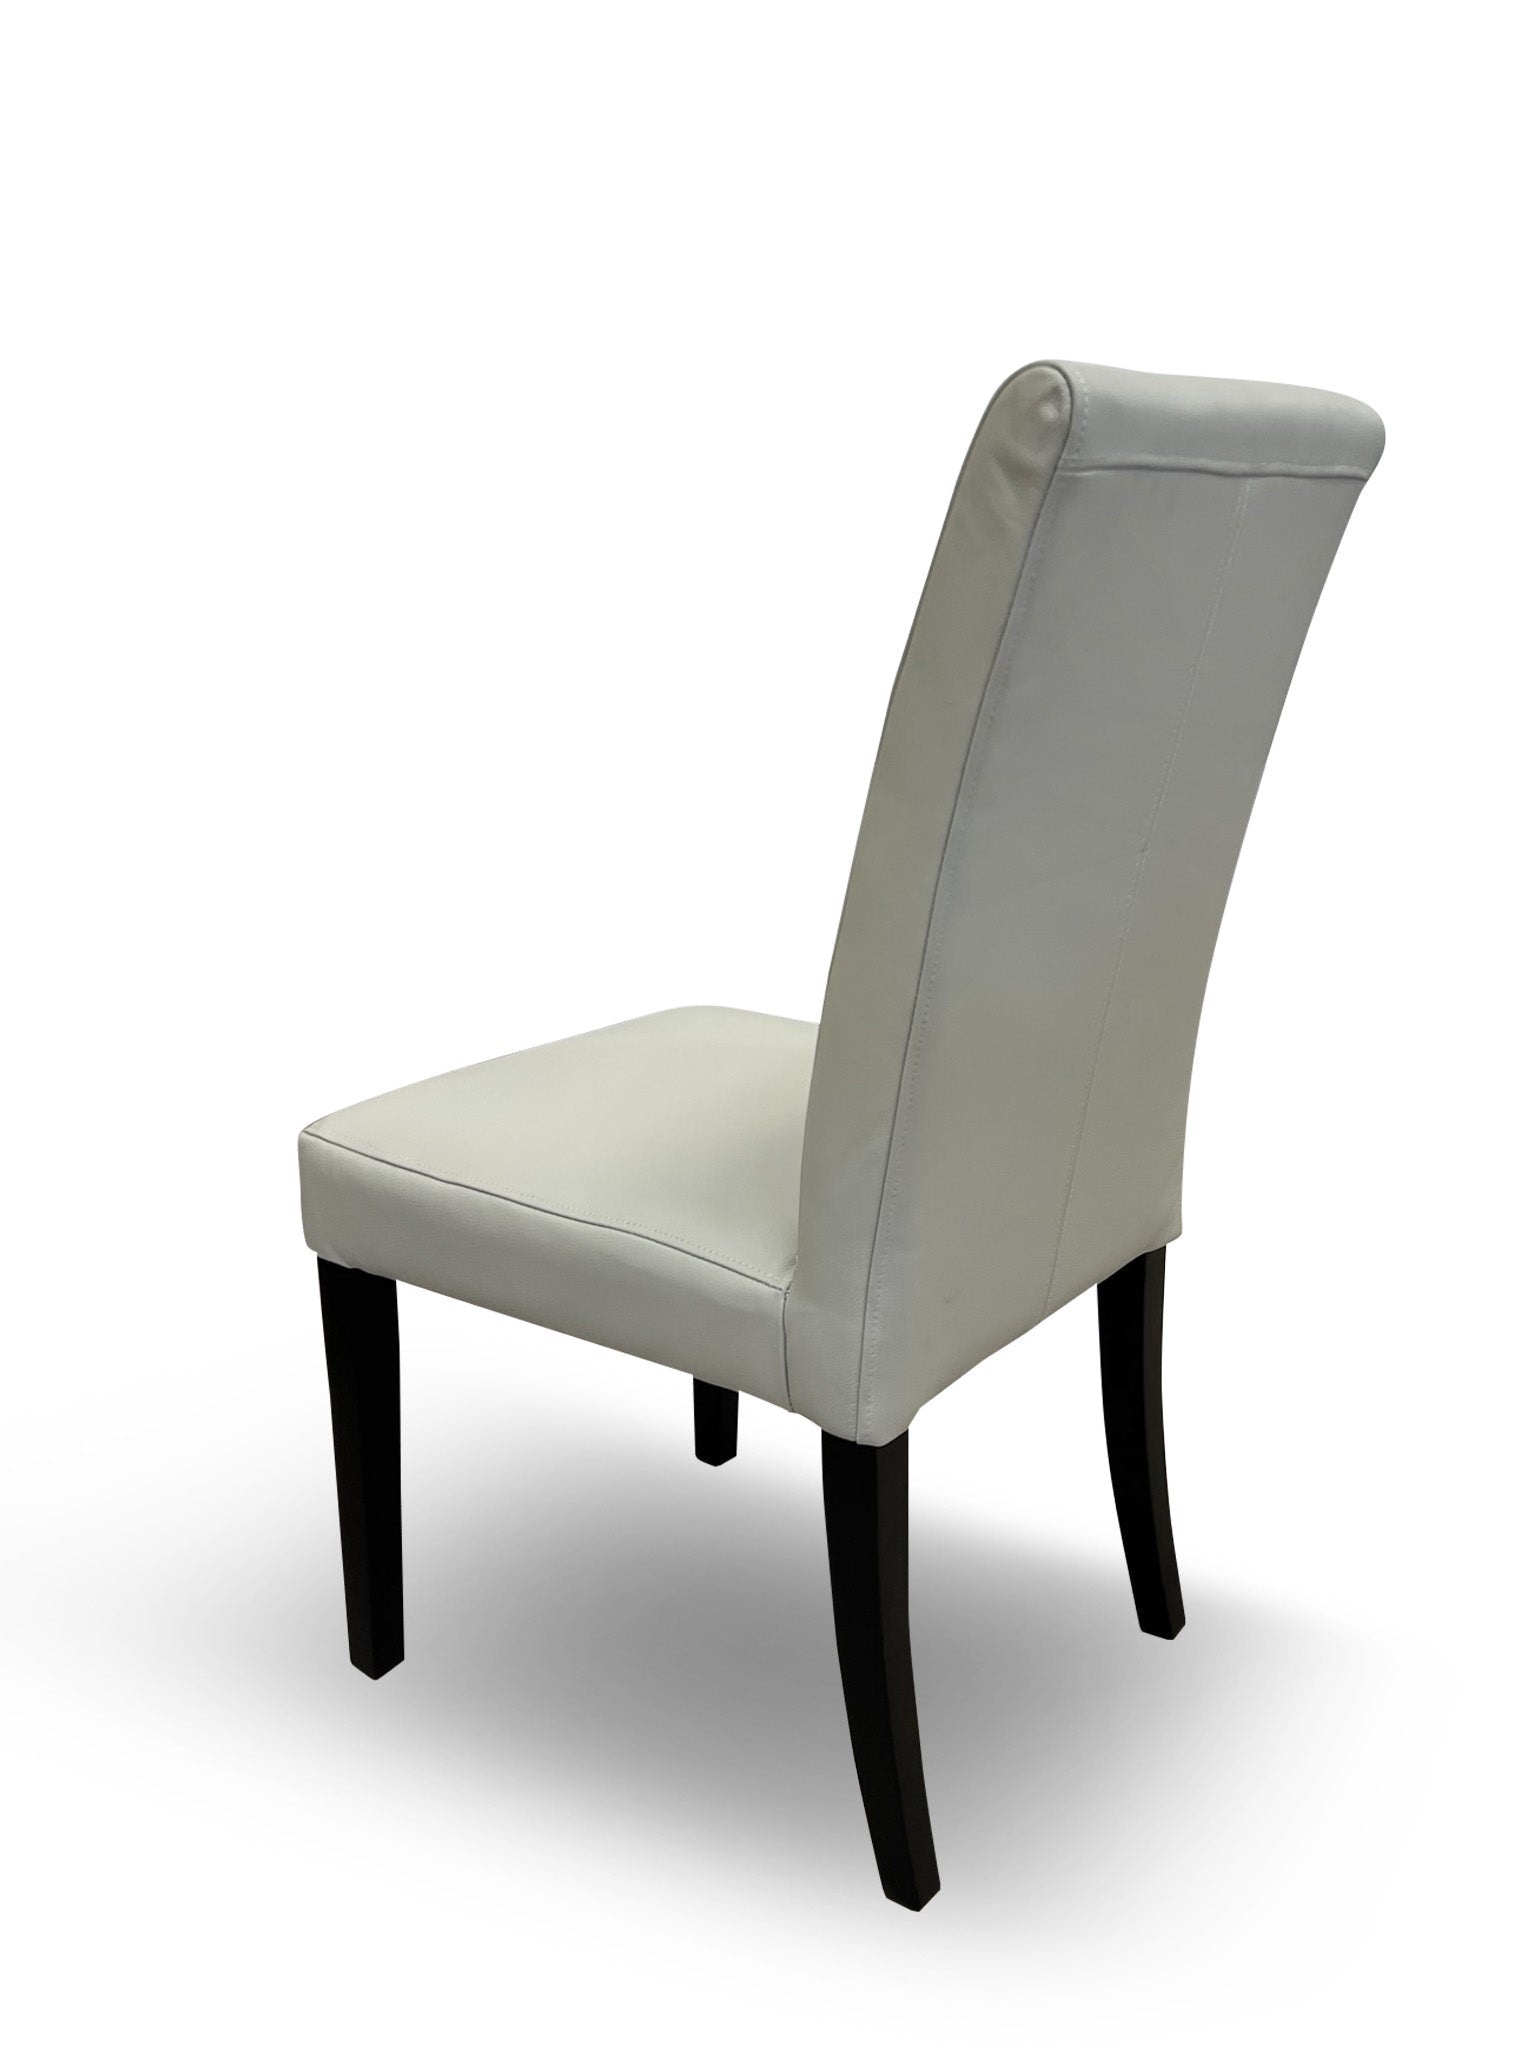 Vancouver 100% Leather Chair In Stone